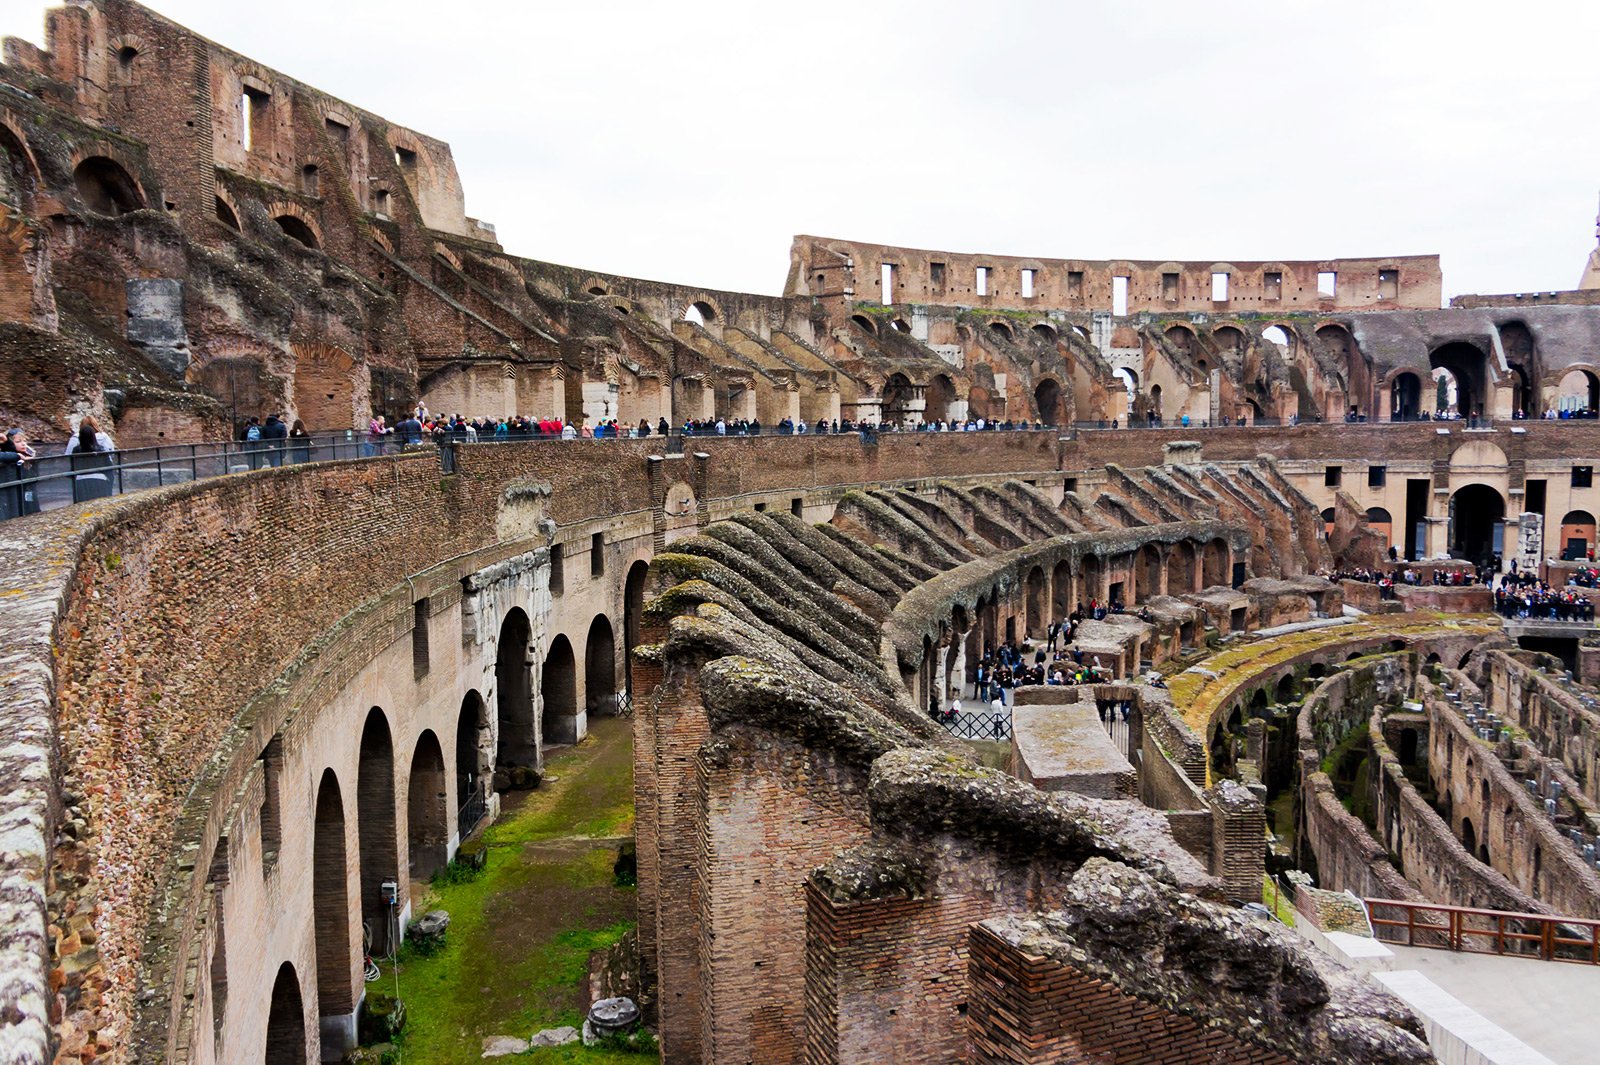 How to visit the Colosseum in Rome